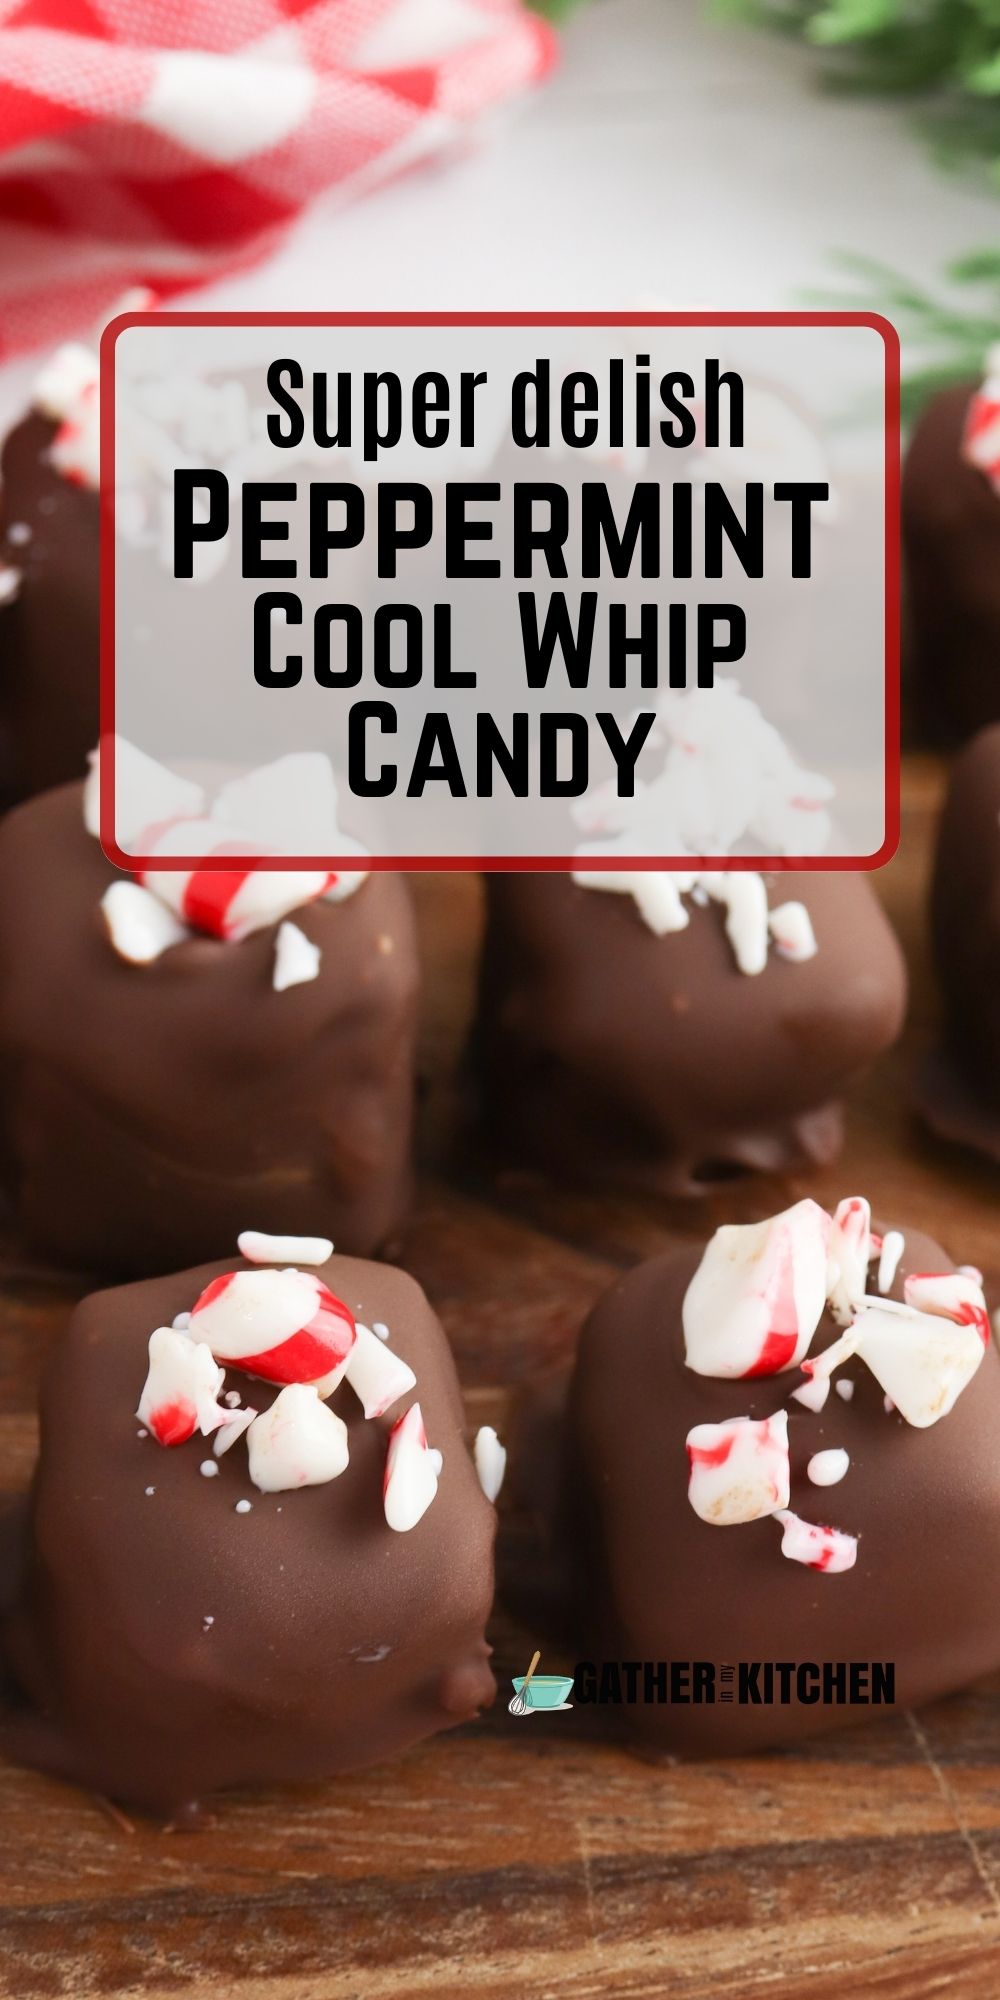 Pin image: top says "Super Delish Peppermint Cool Whip Candy" and background is wooden block with pieces of candy.